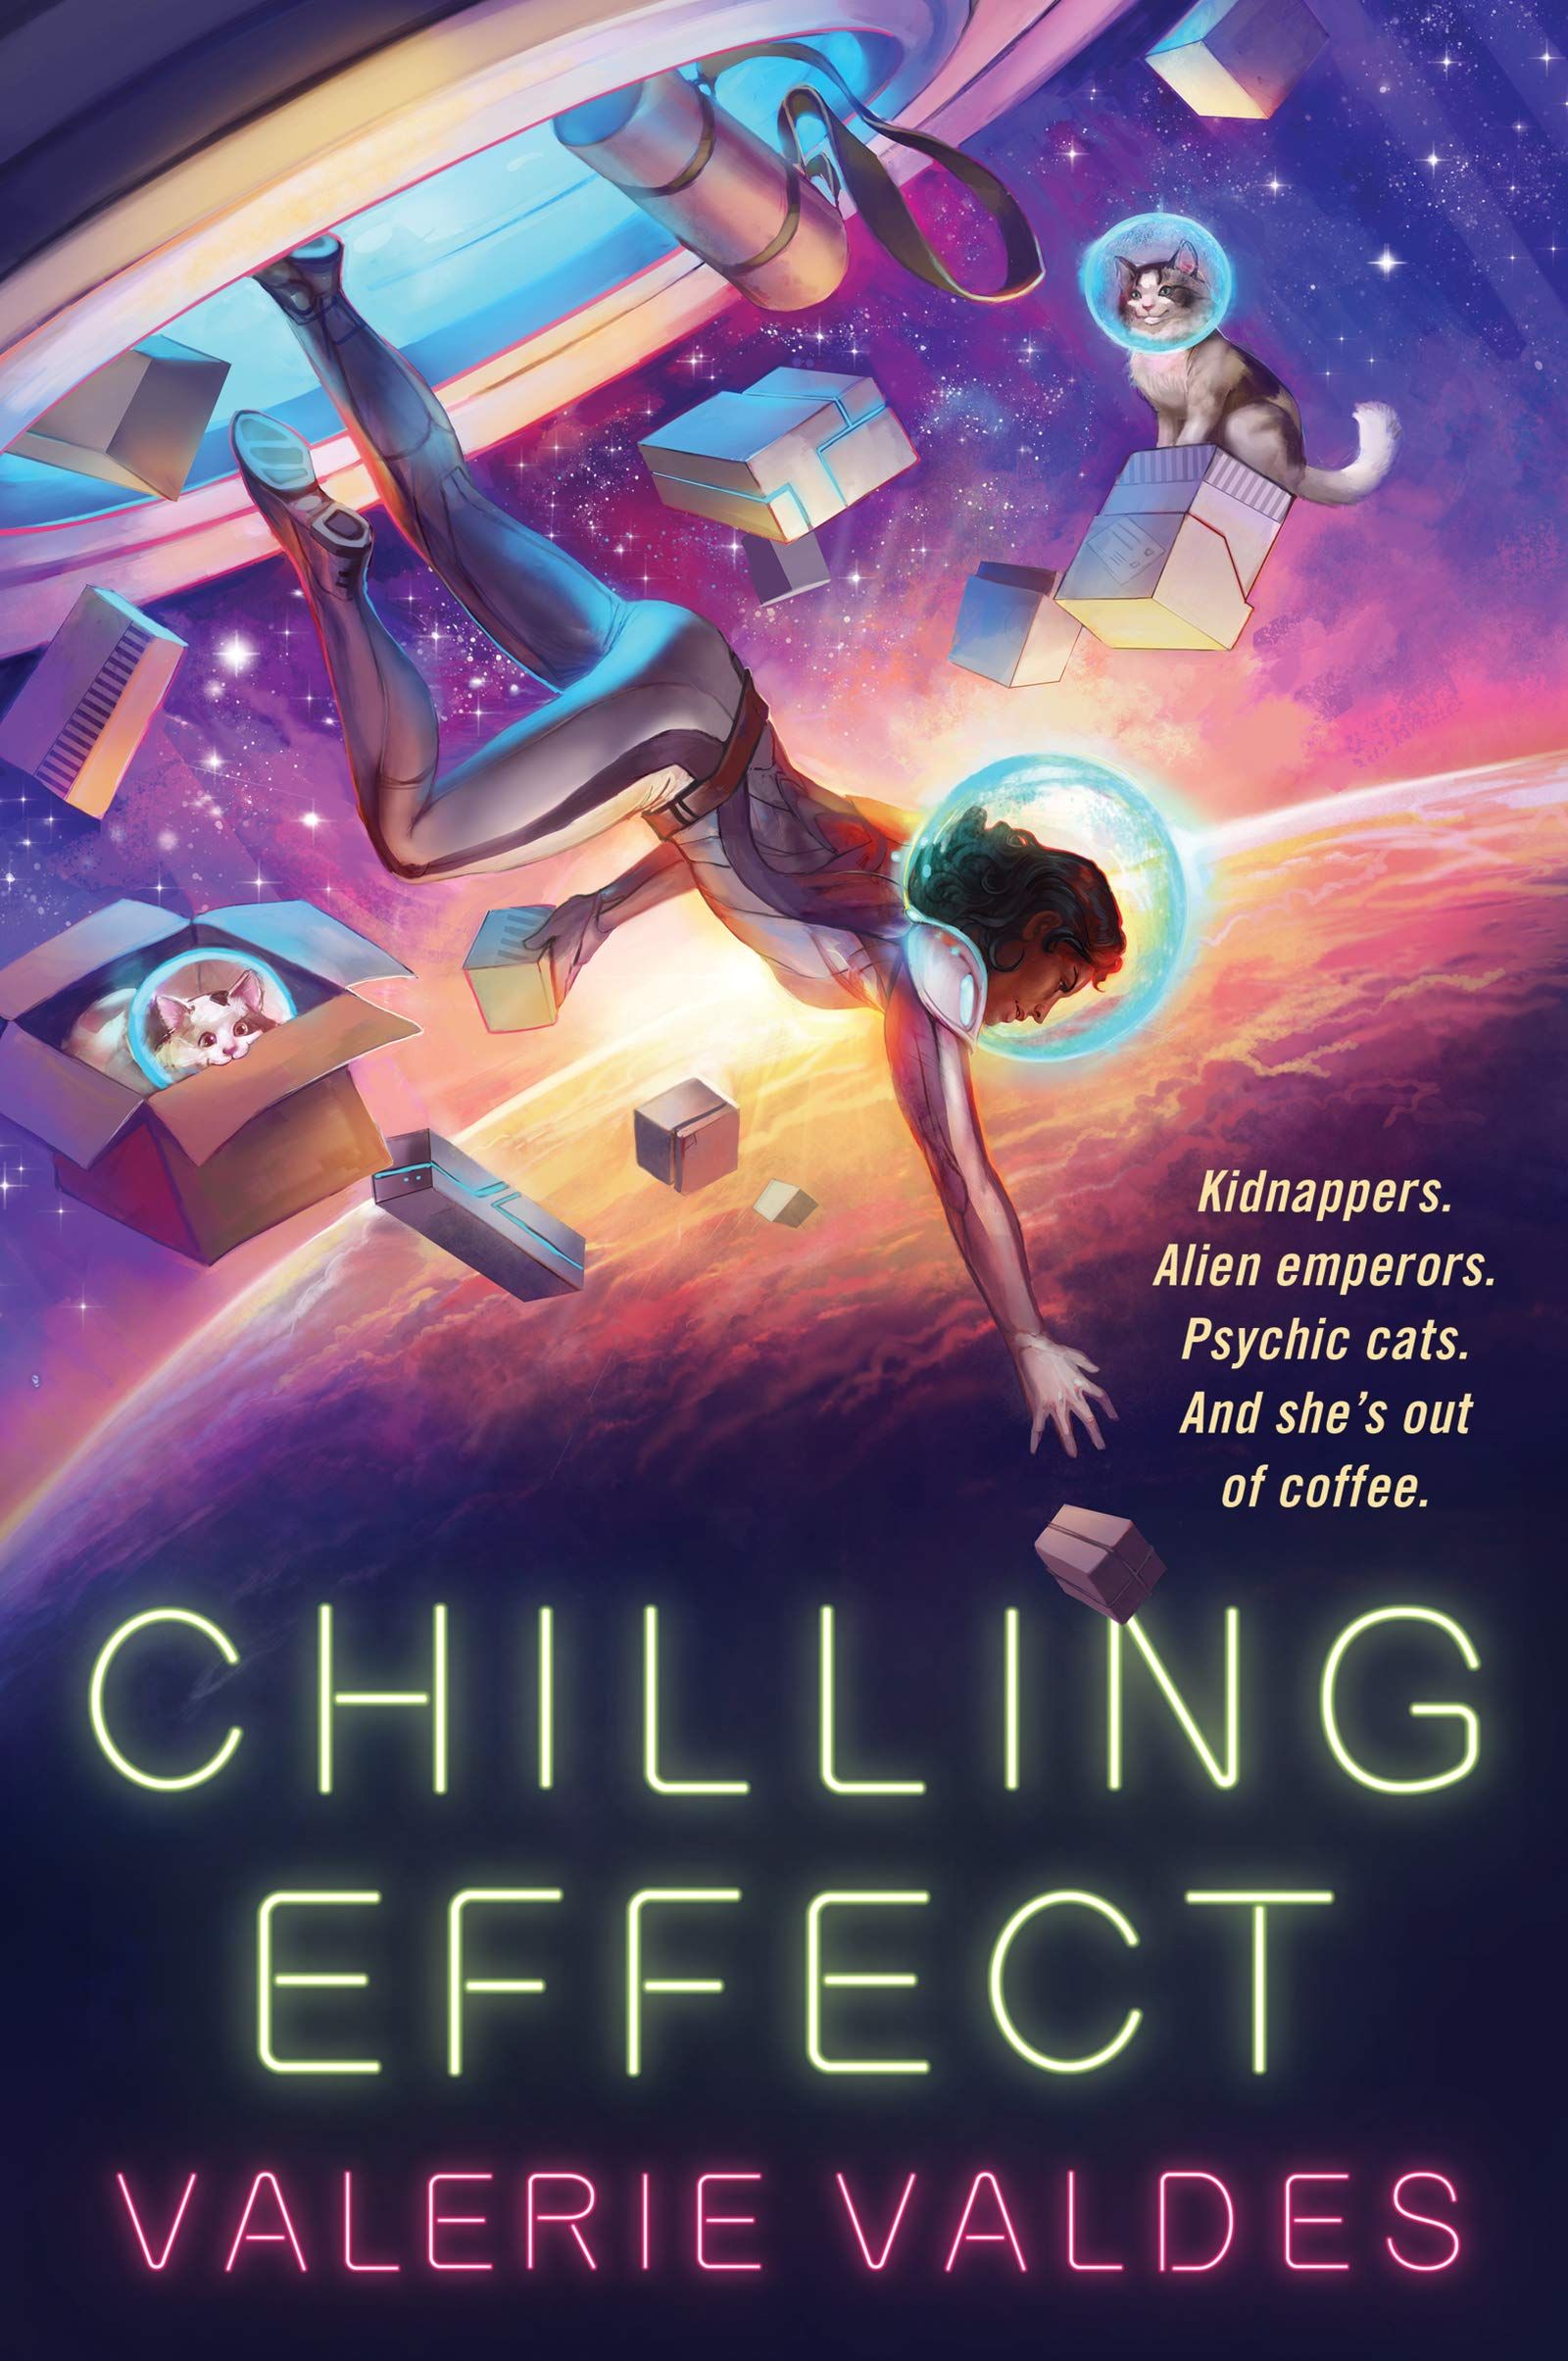 The cover of Chilling Effect, including two cats in space wearing spacesuit helmets